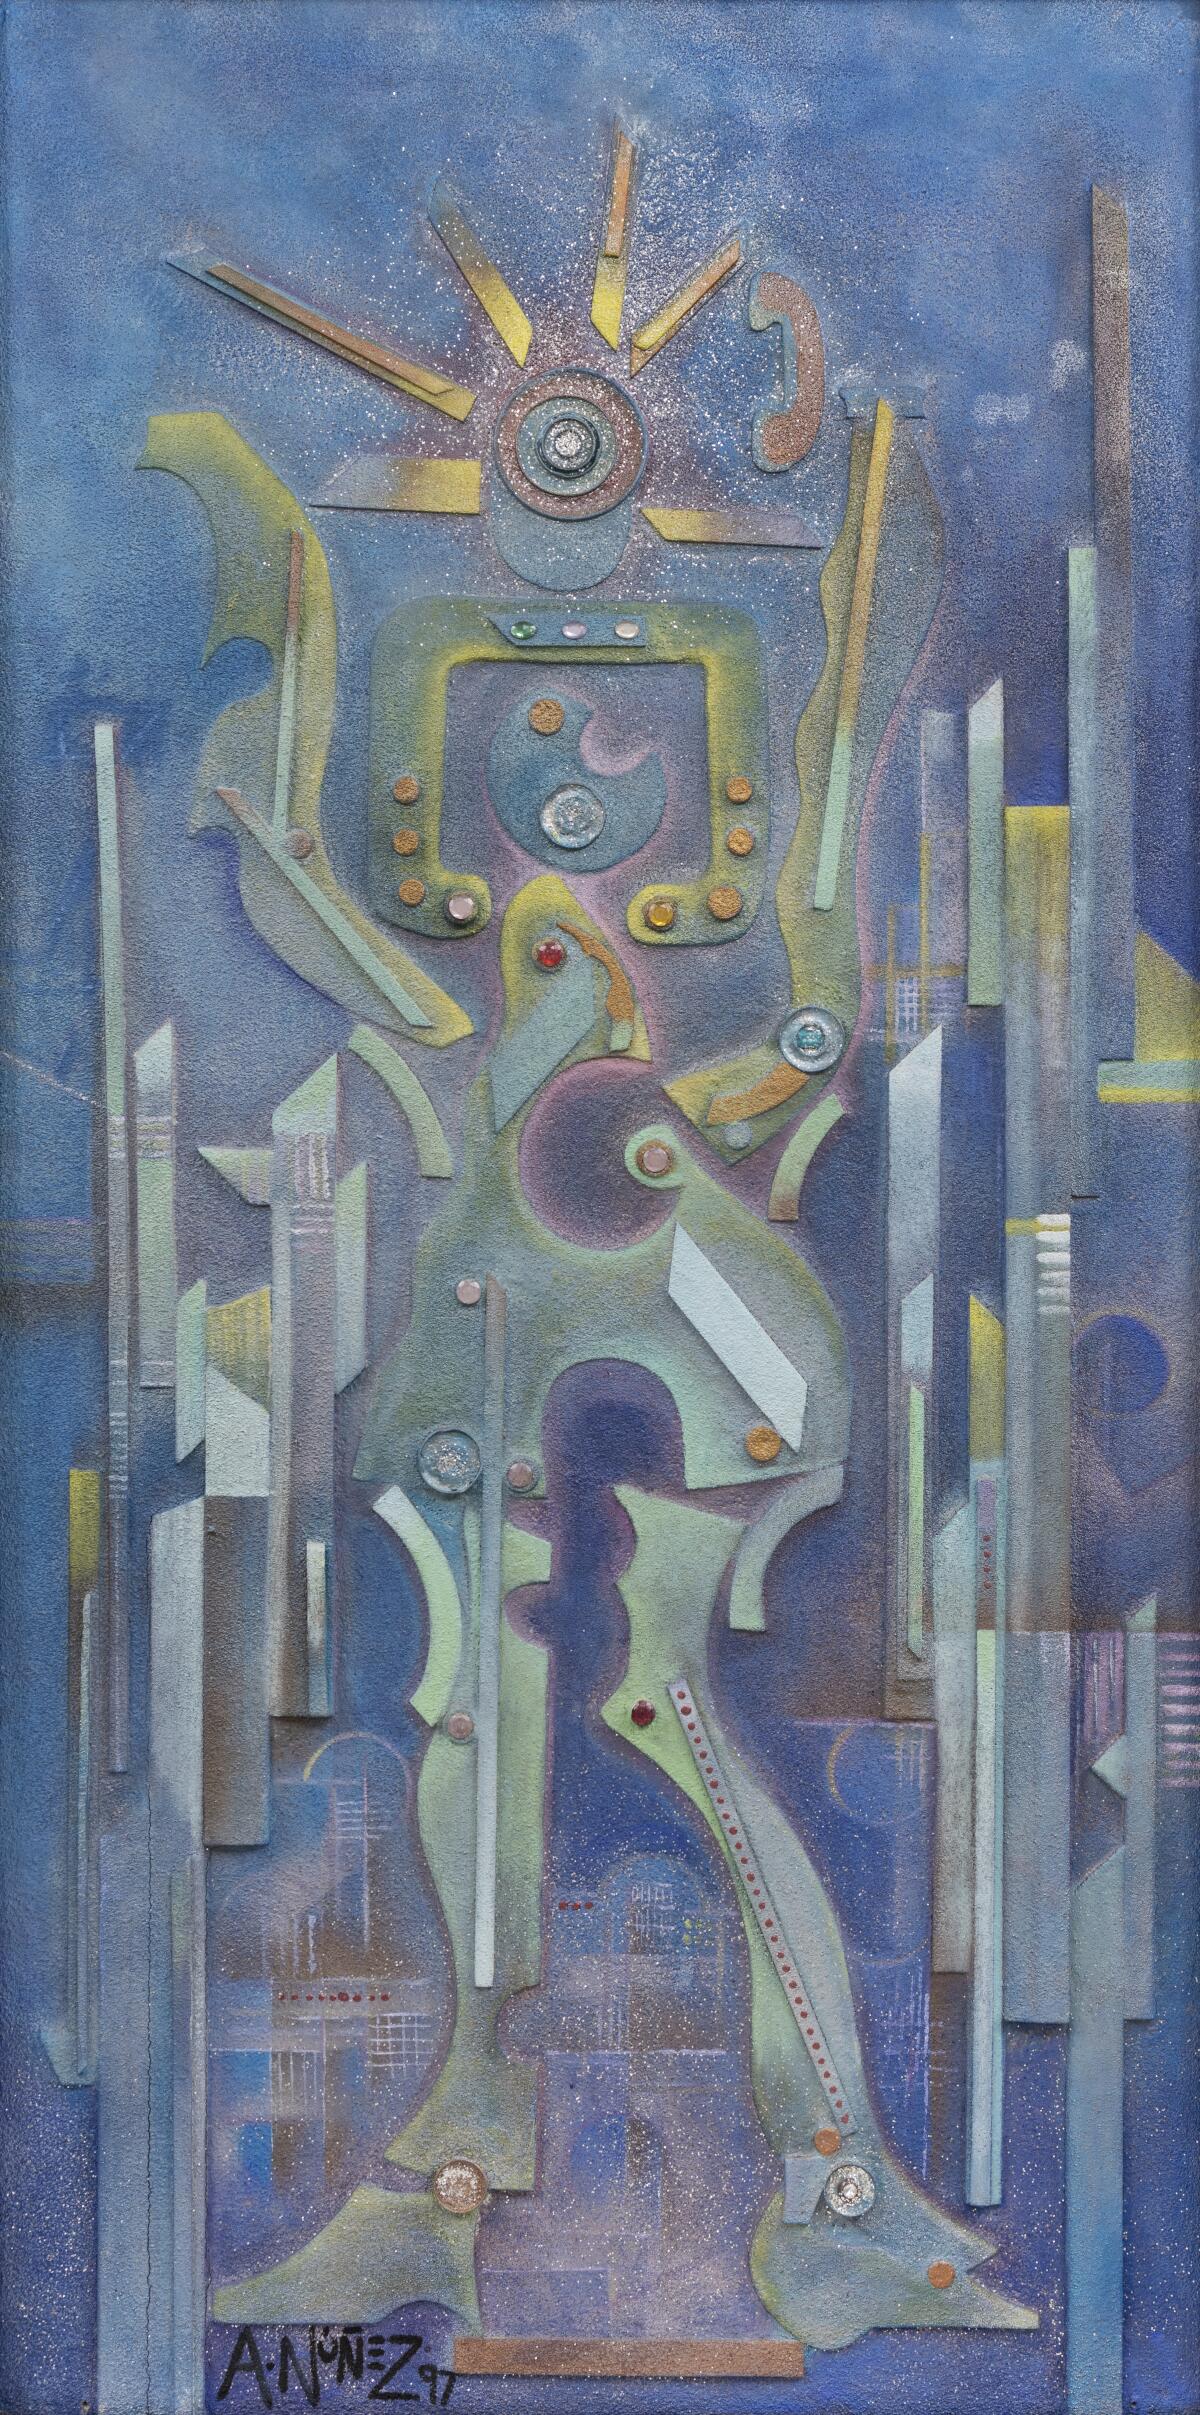 "Sun Goddess of the Computer Age" by Armando Nuñez (1997, mixed media and acrylic on wood panel)